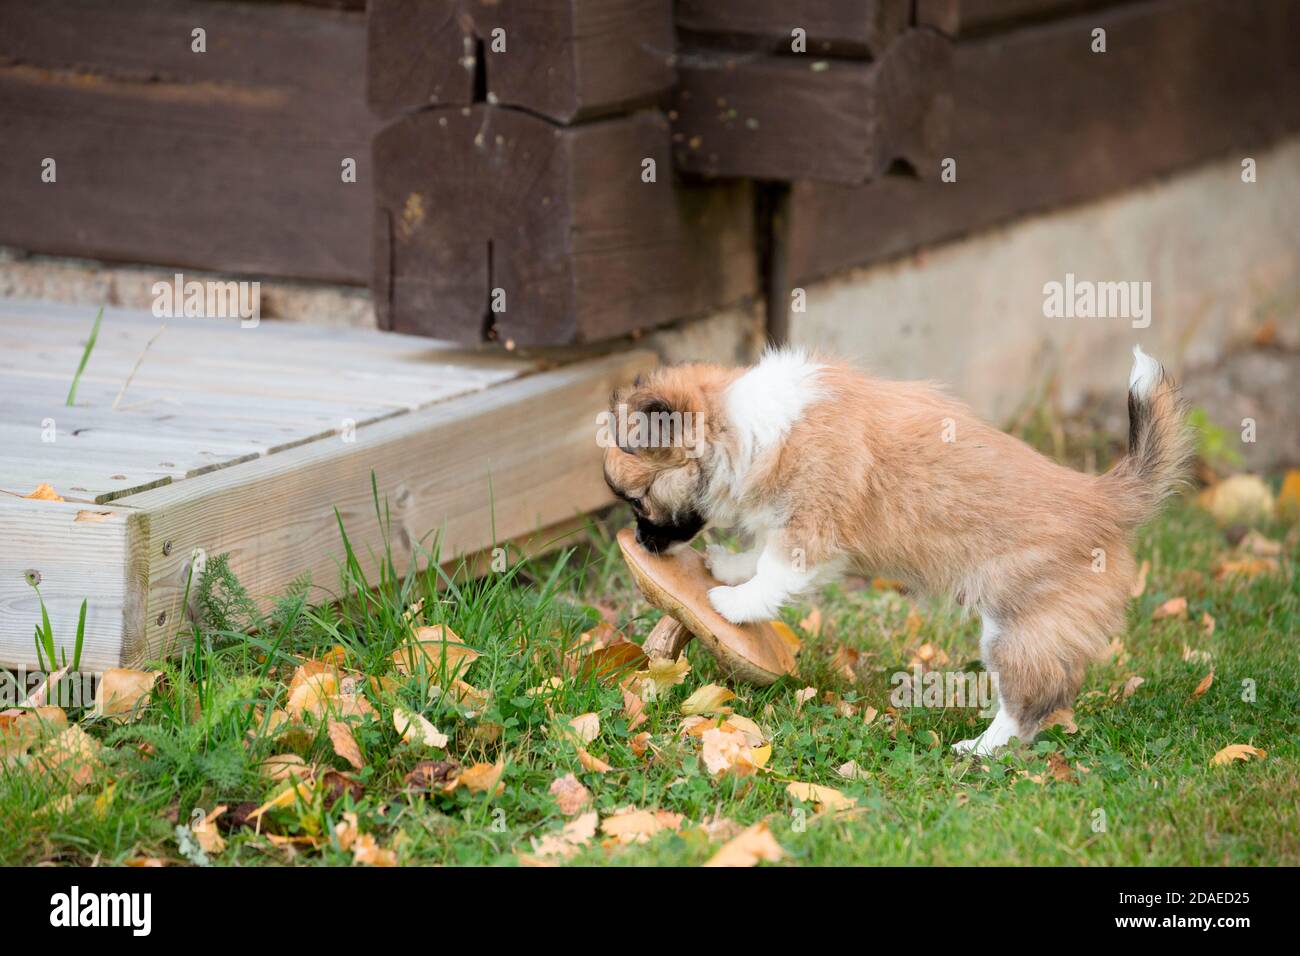 Chihuahua puppy, longhaired, sniff, mushroom, garden, autumnal scene, Finland Stock Photo